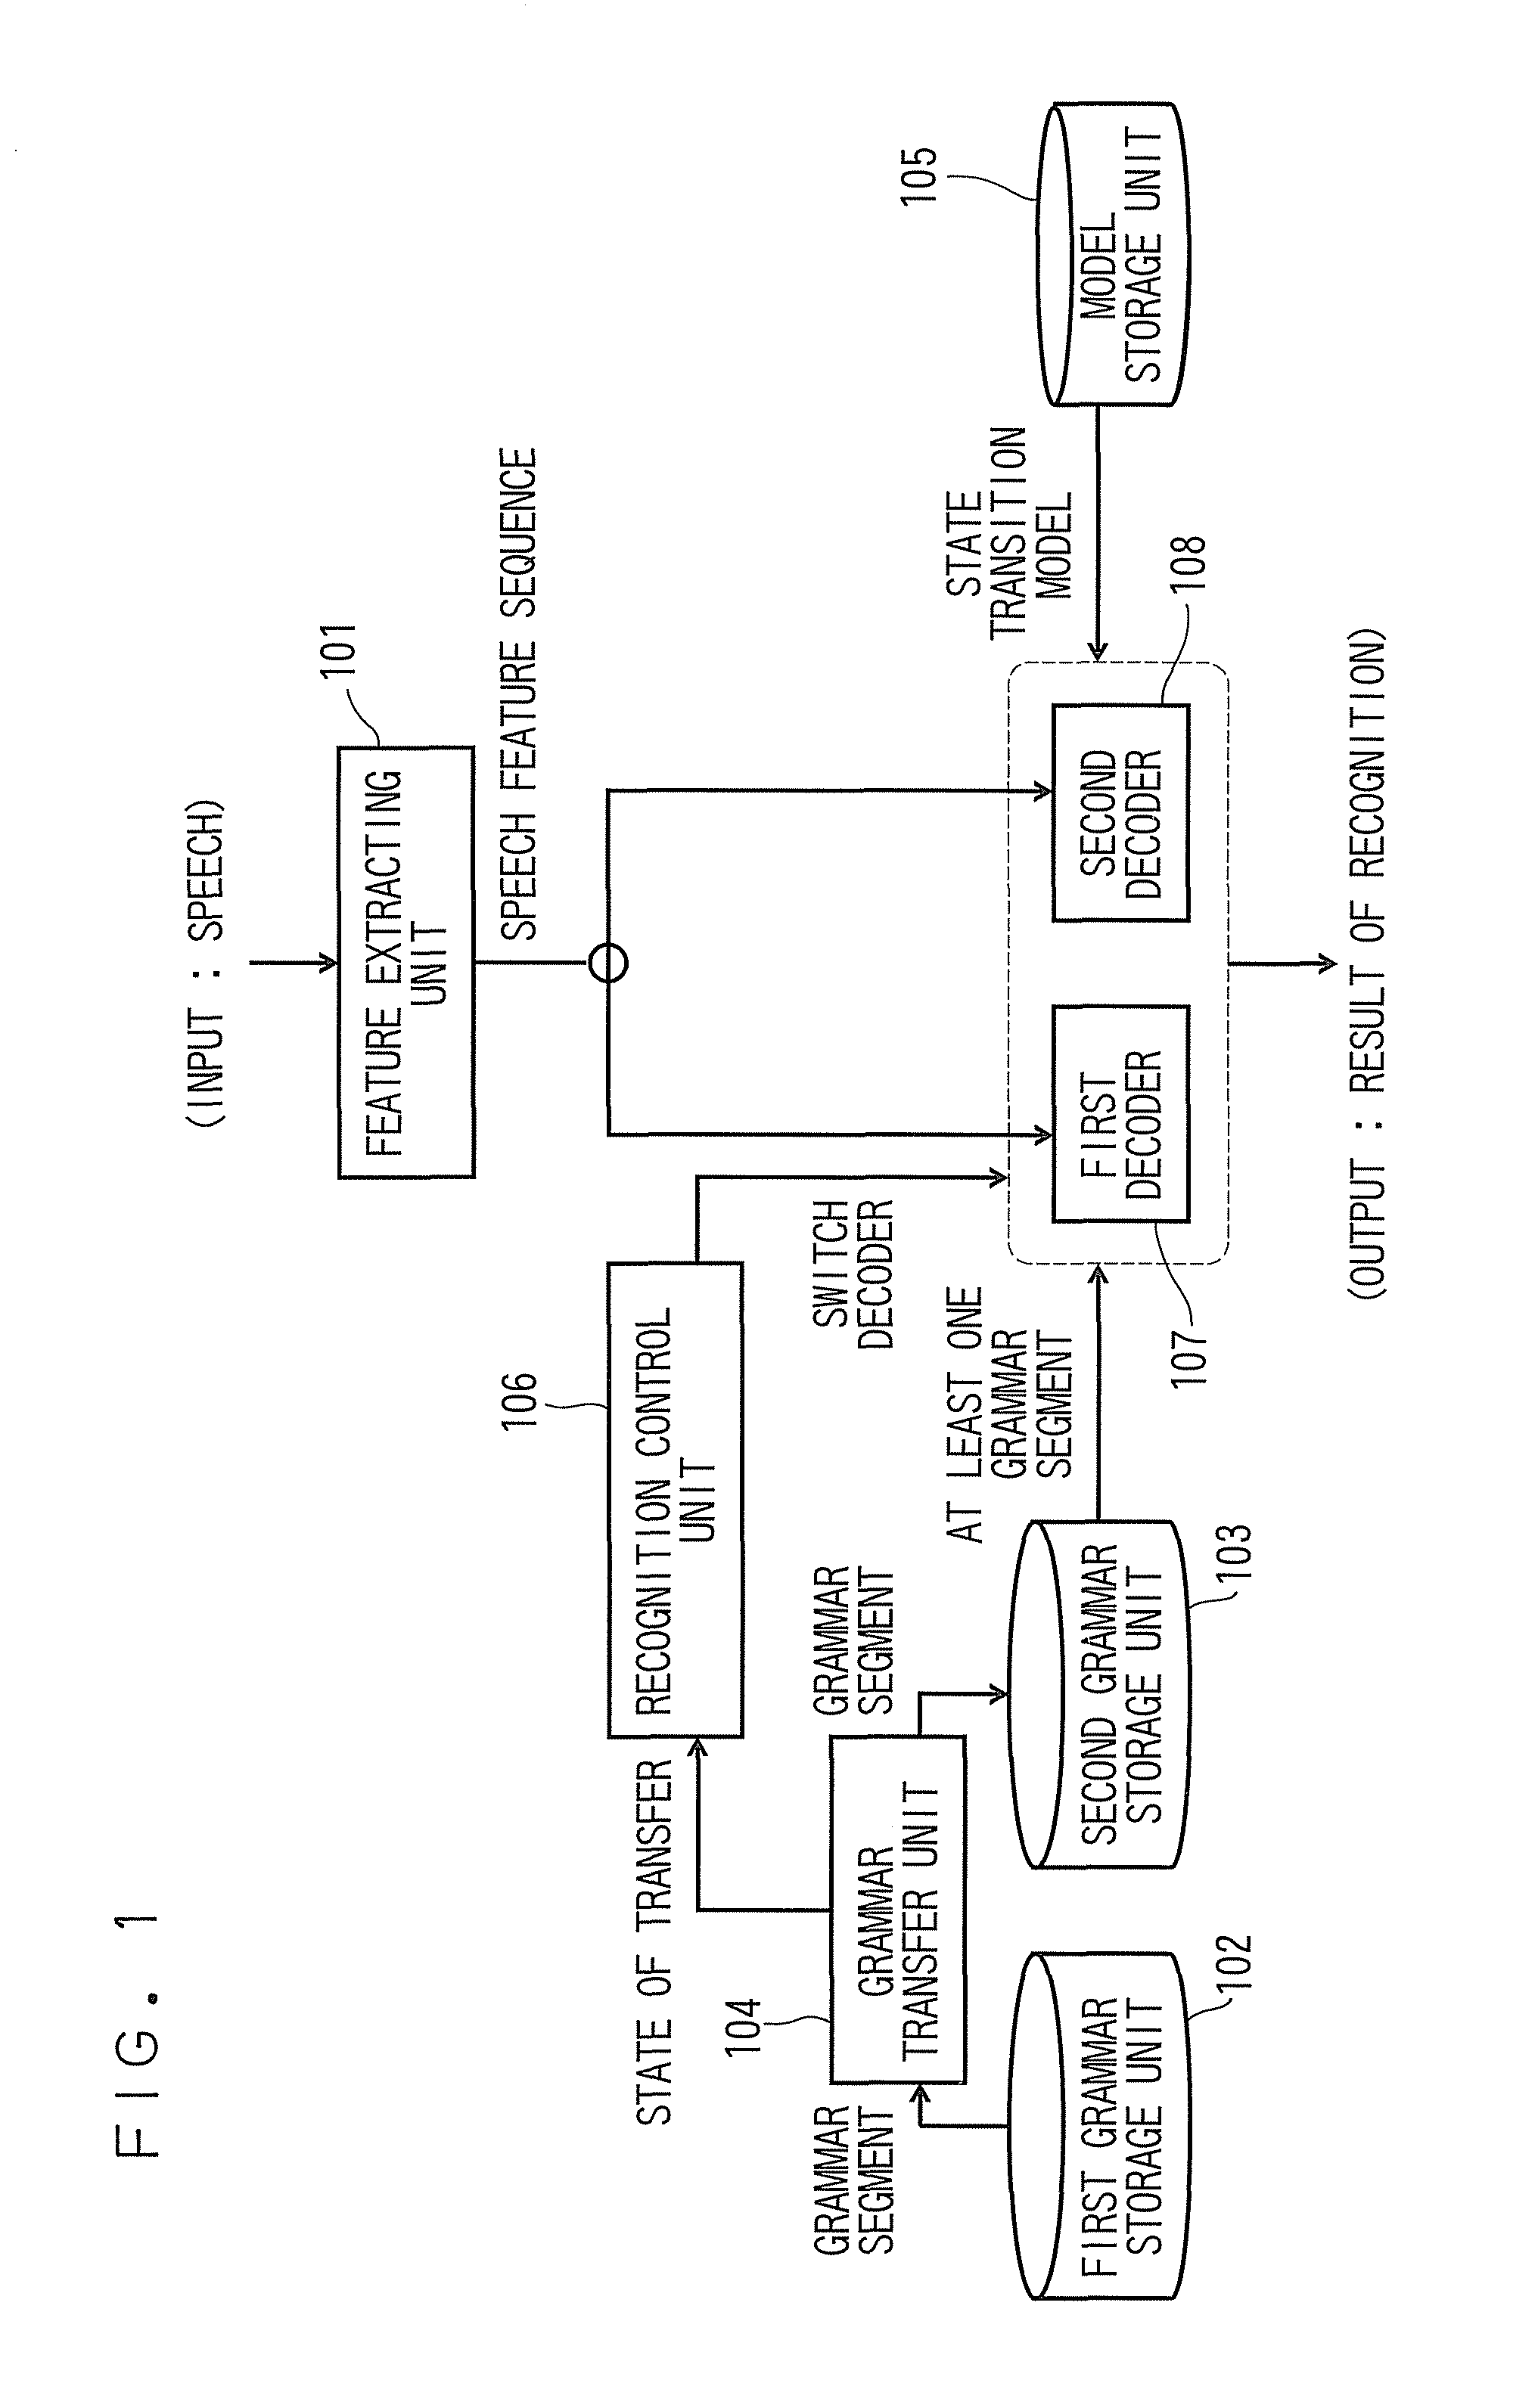 Speech recognition apparatus and method thereof